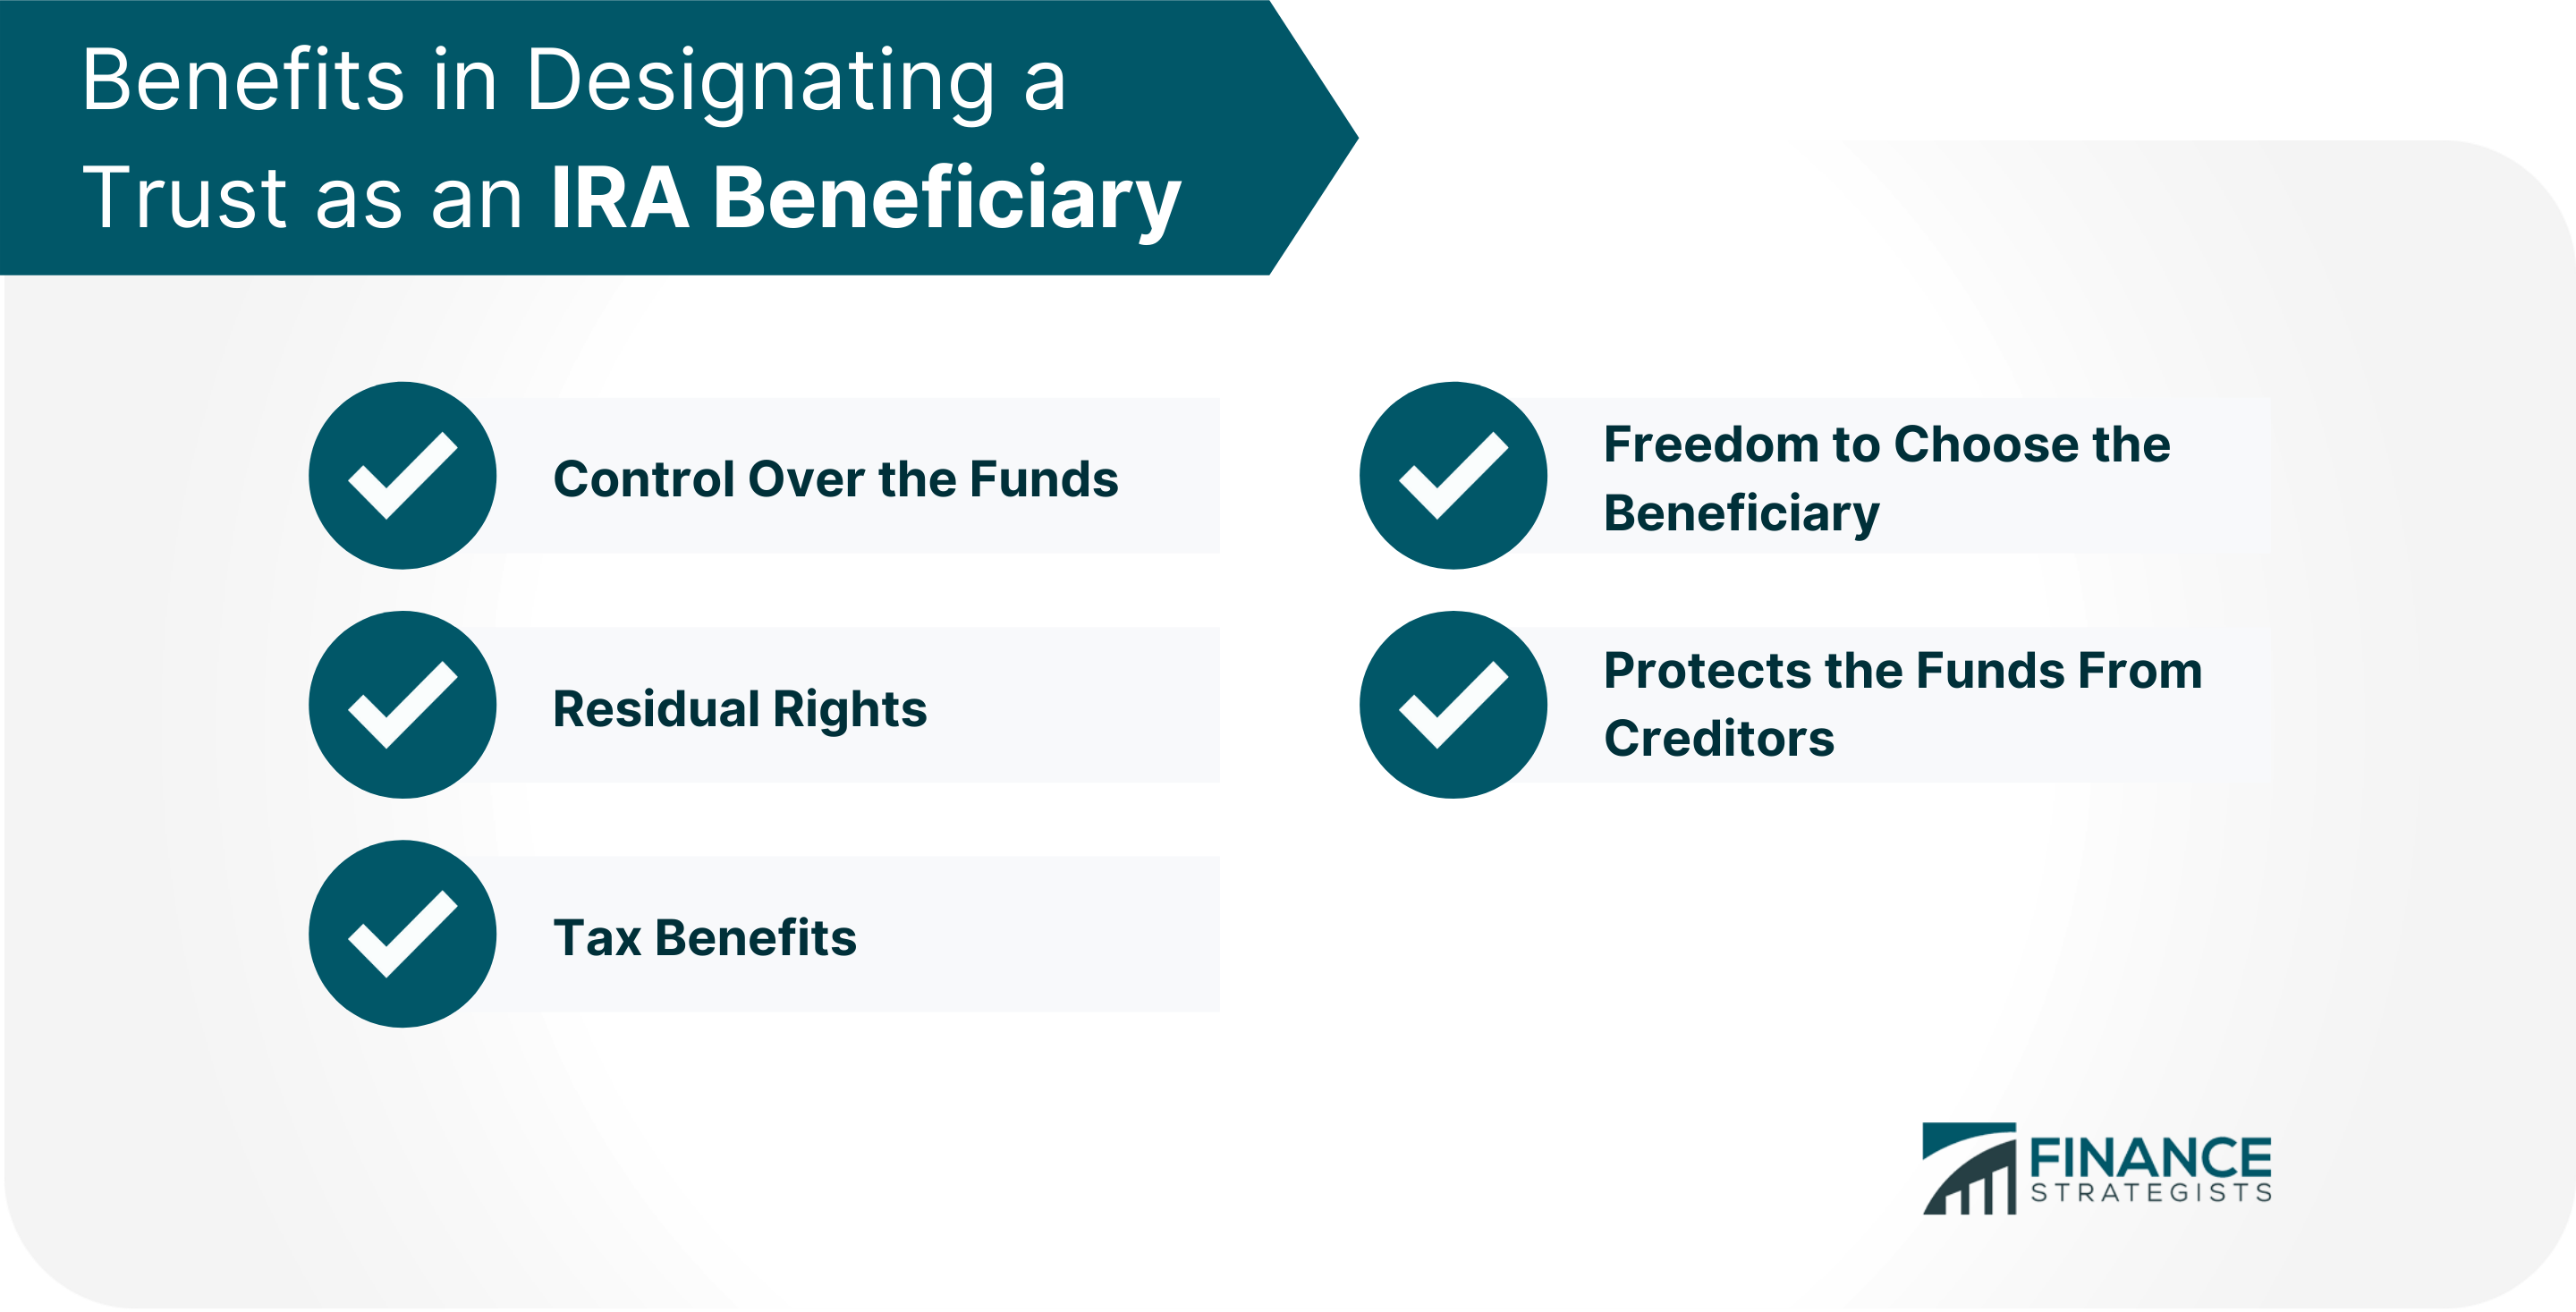 Benefits_in_Designating_a_Trust_as_an_IRA_Beneficiary_